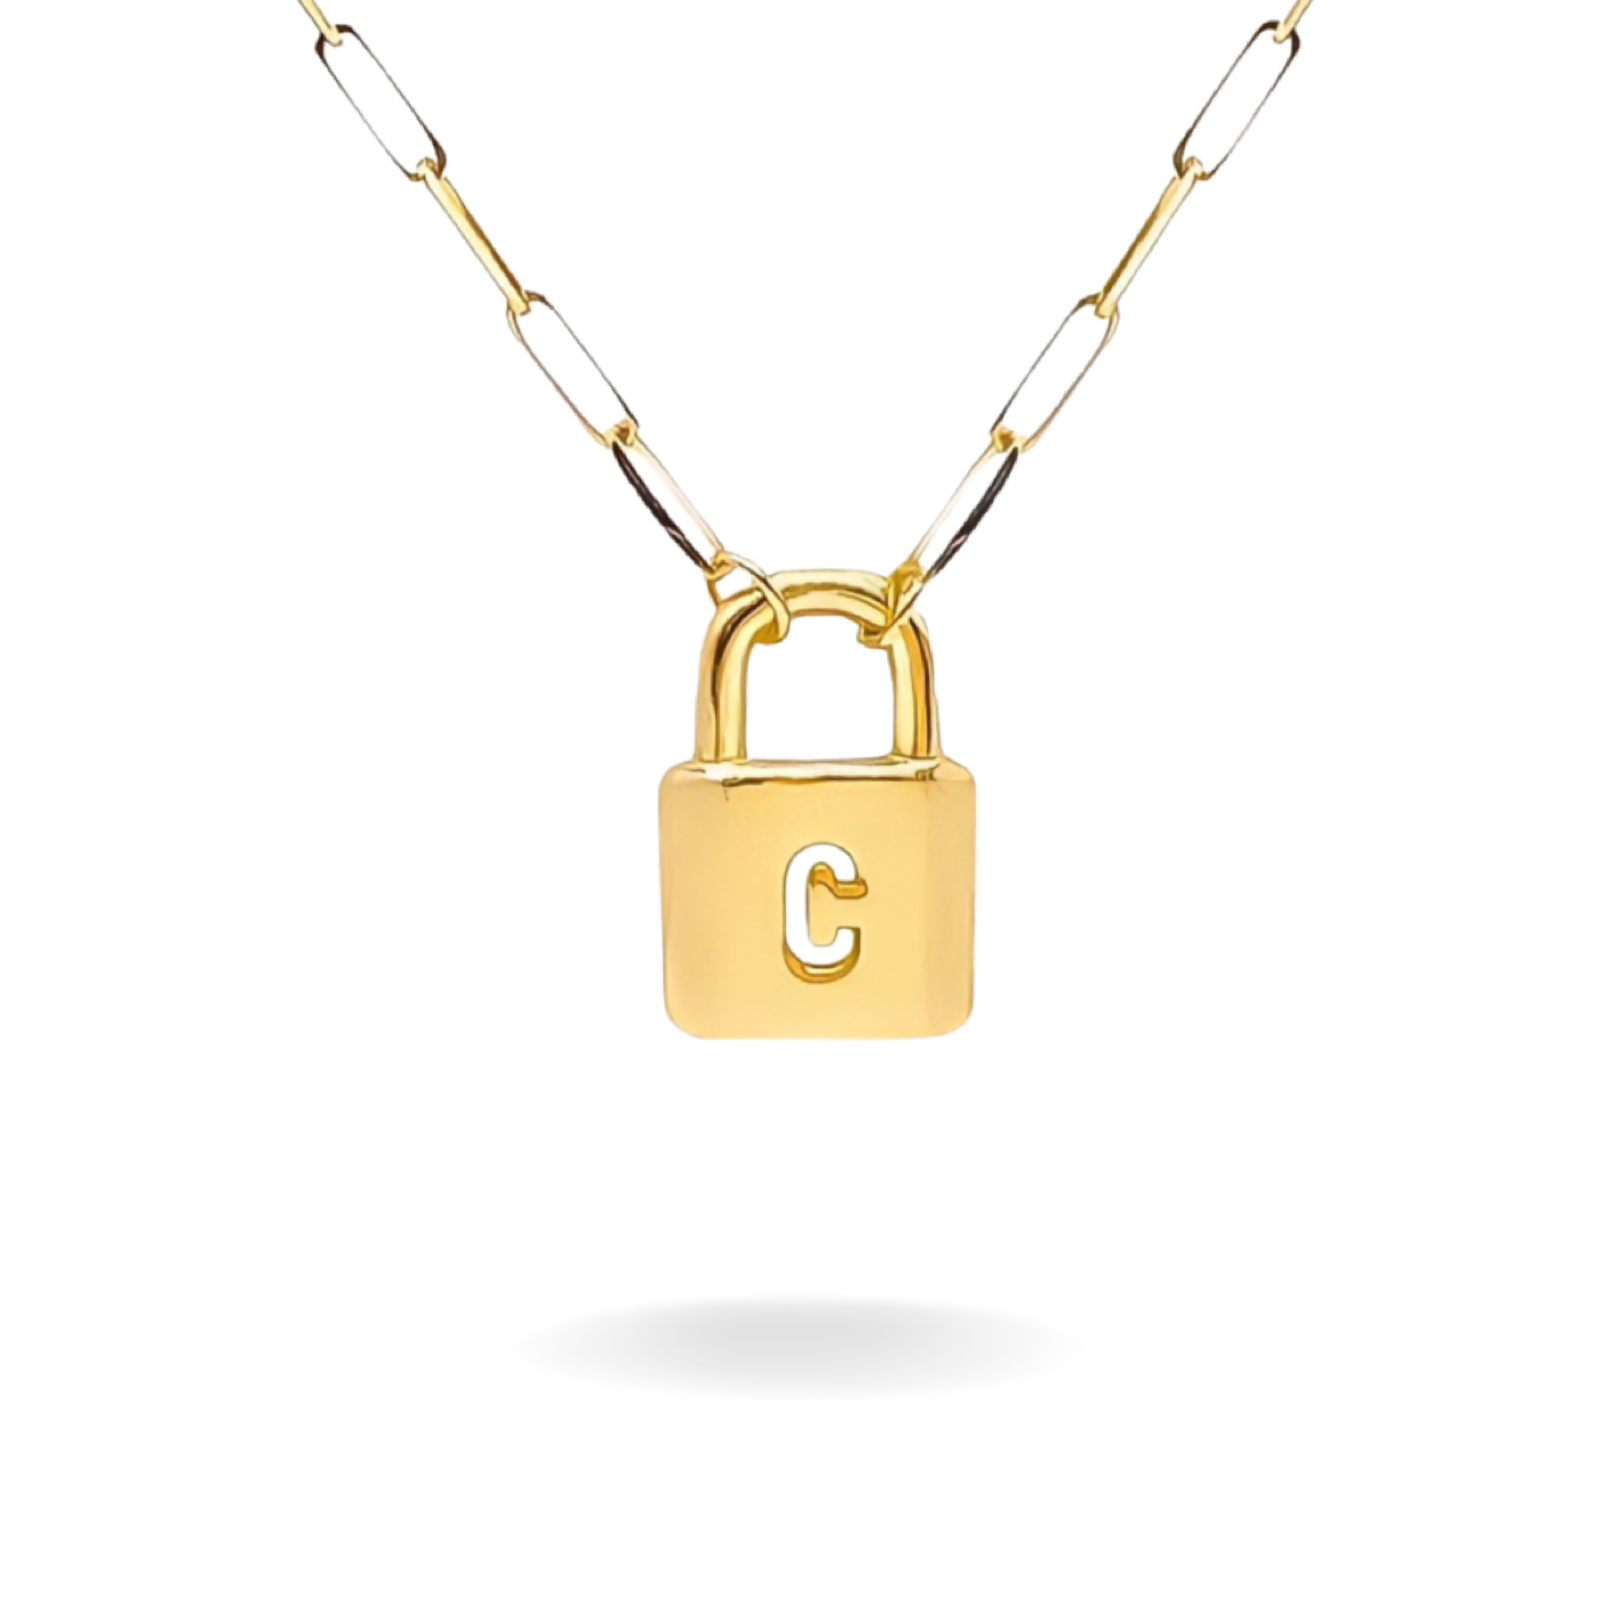 14K YELLOW GOLD SERIF INITIAL LOCK PAPERCLIP NECKLACE